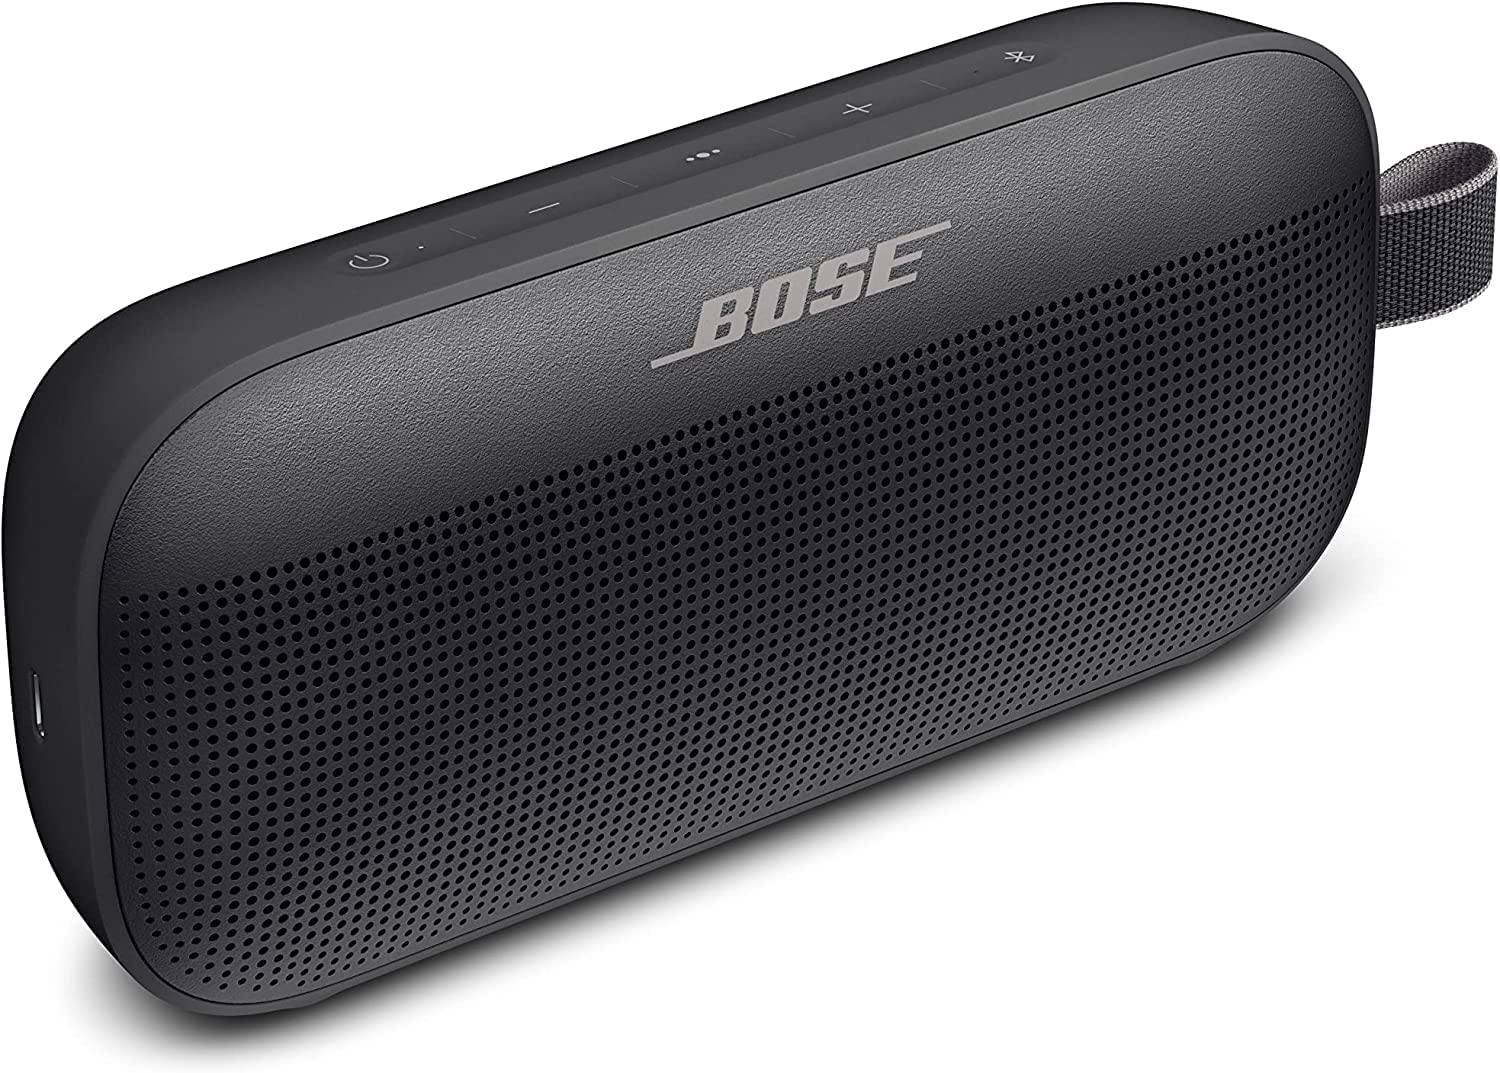 Deal Alert! Bose Portable Bluetooth Speakers Are on Sale At Its Lowest Price Ever